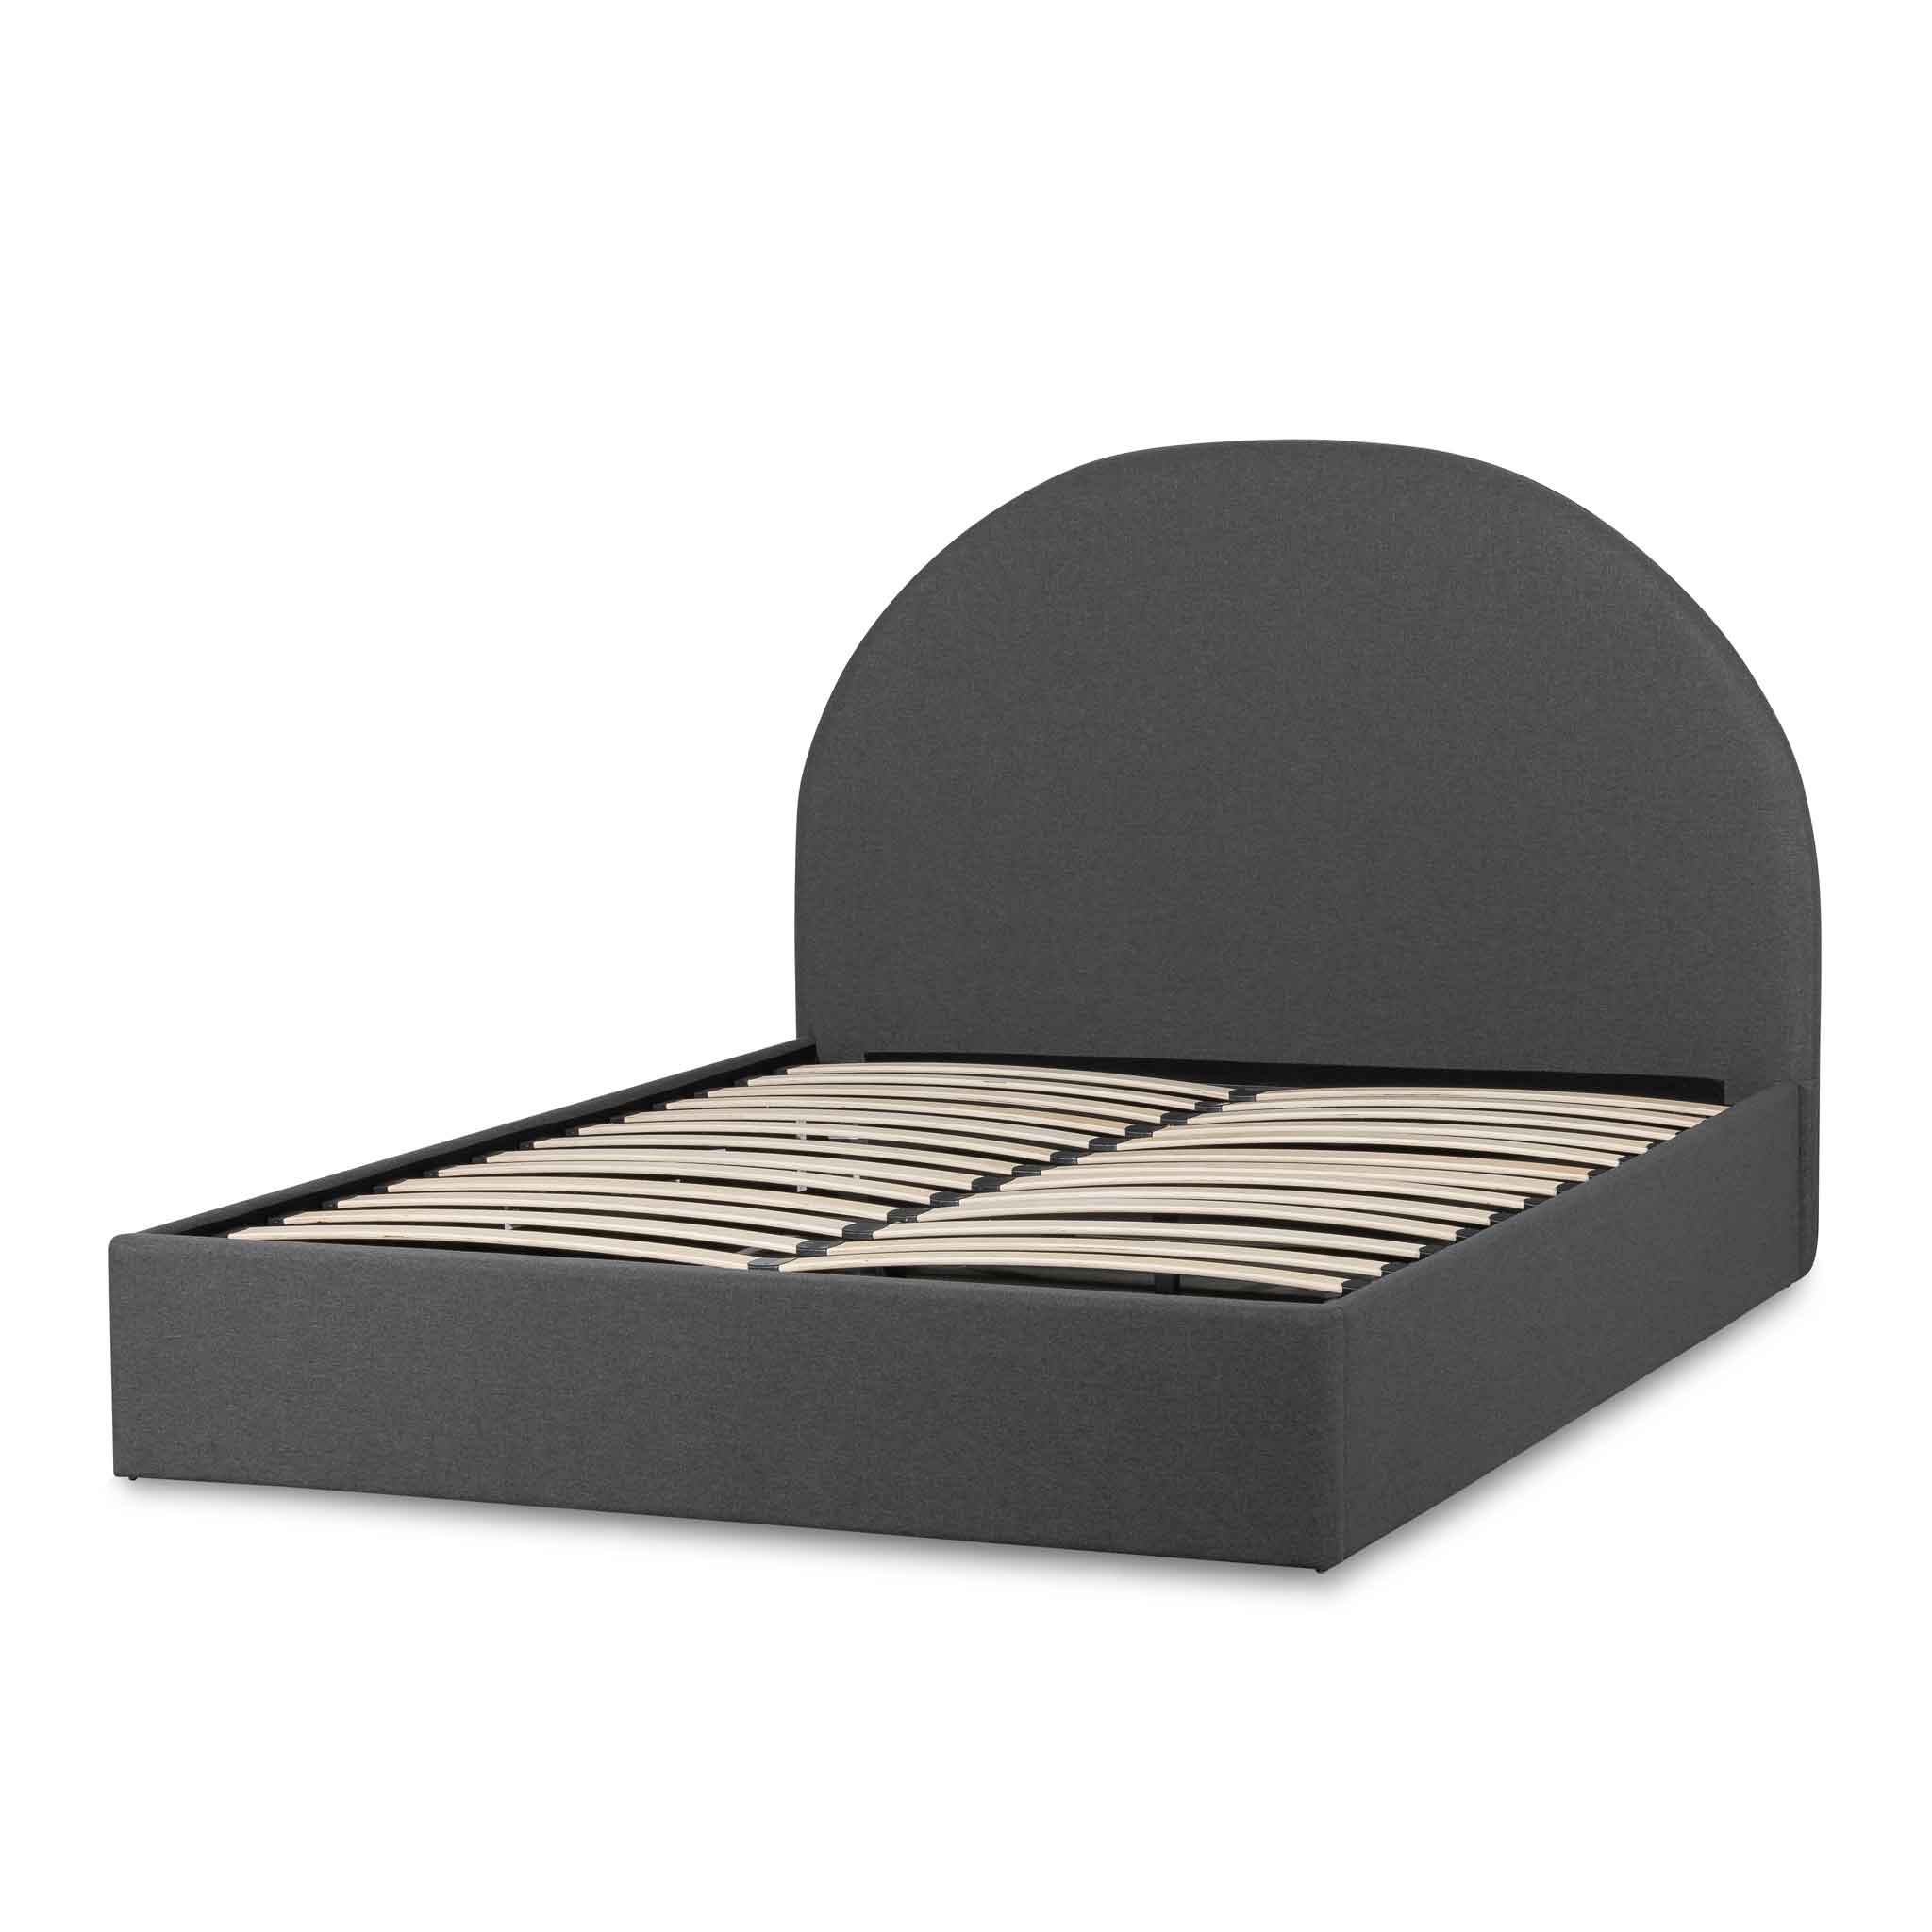 Maximus King Bed Frame - Grey - Beds